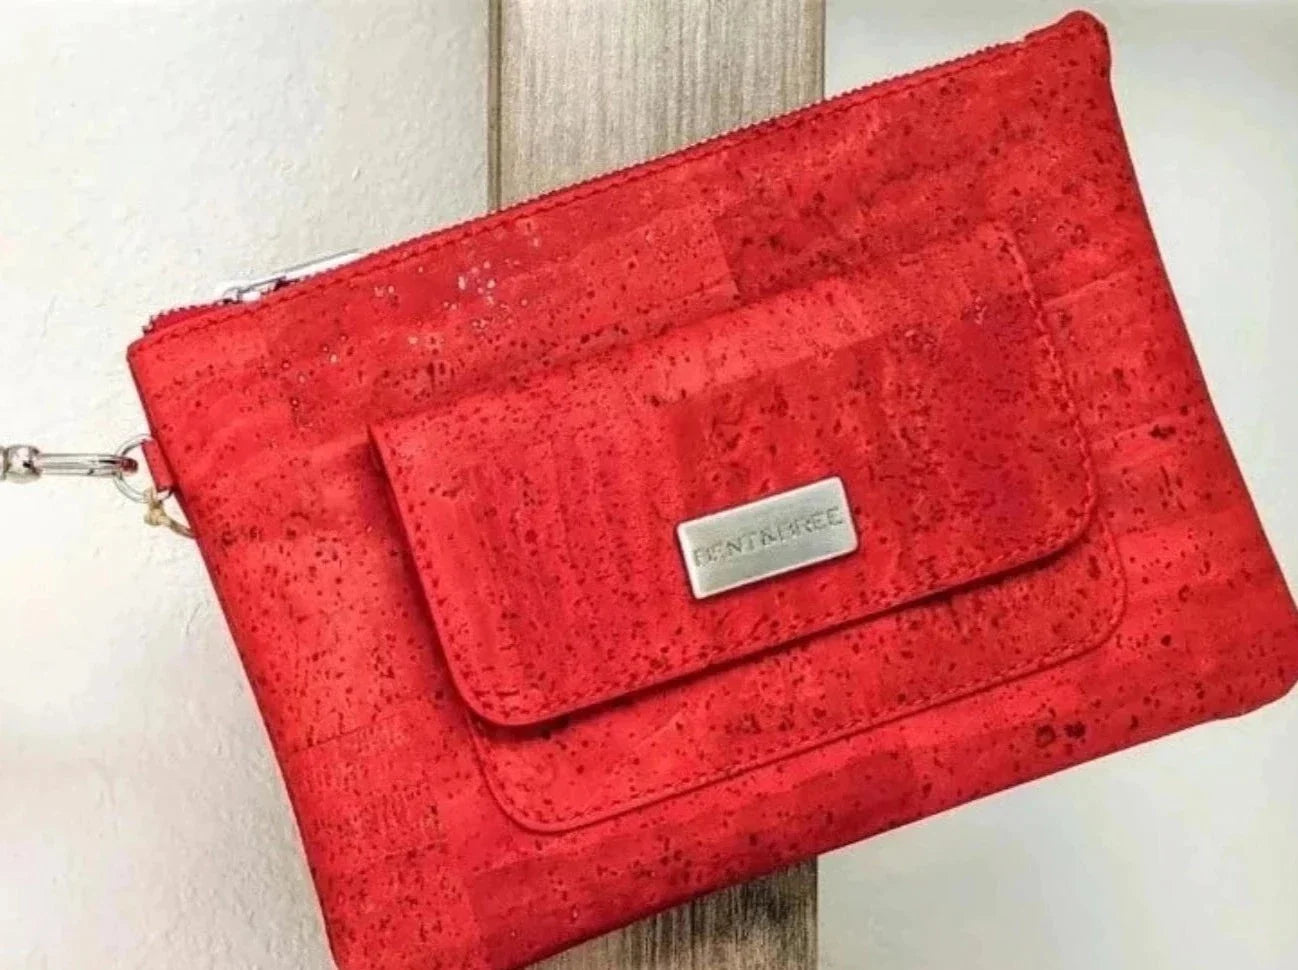 Granny Small velvet clutch in red - Vivienne Westwood | Mytheresa